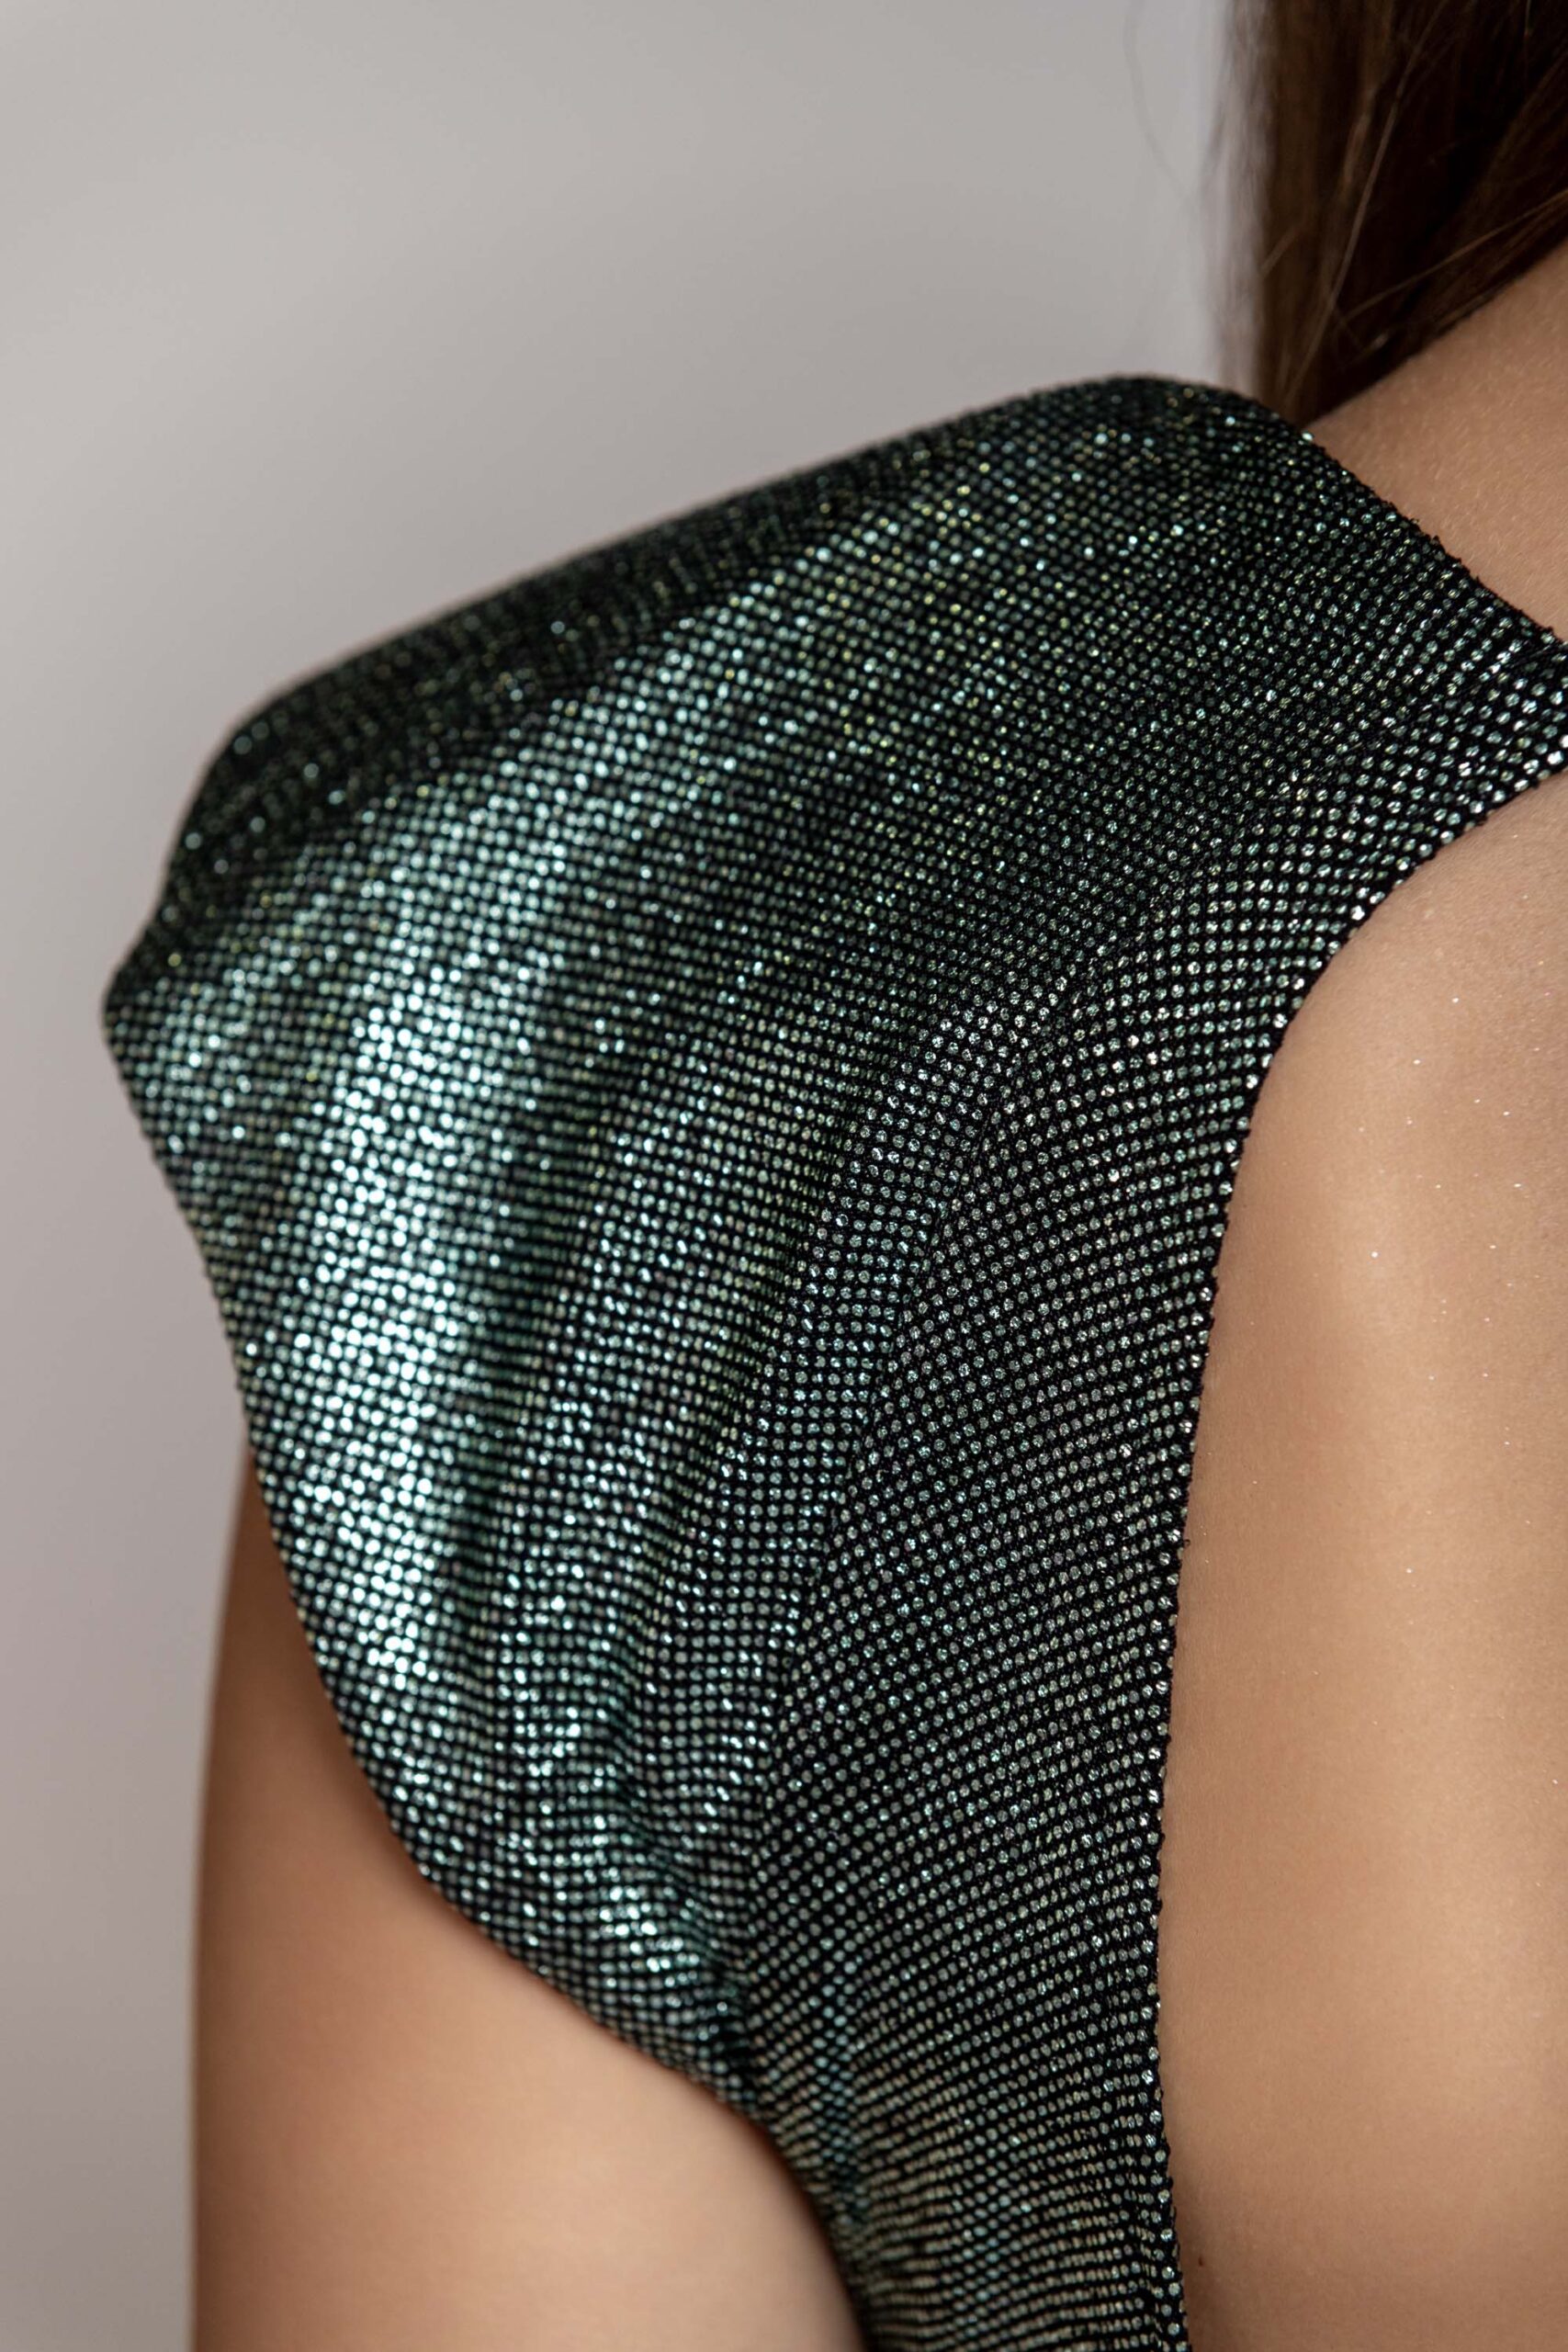 details of the back of the dress